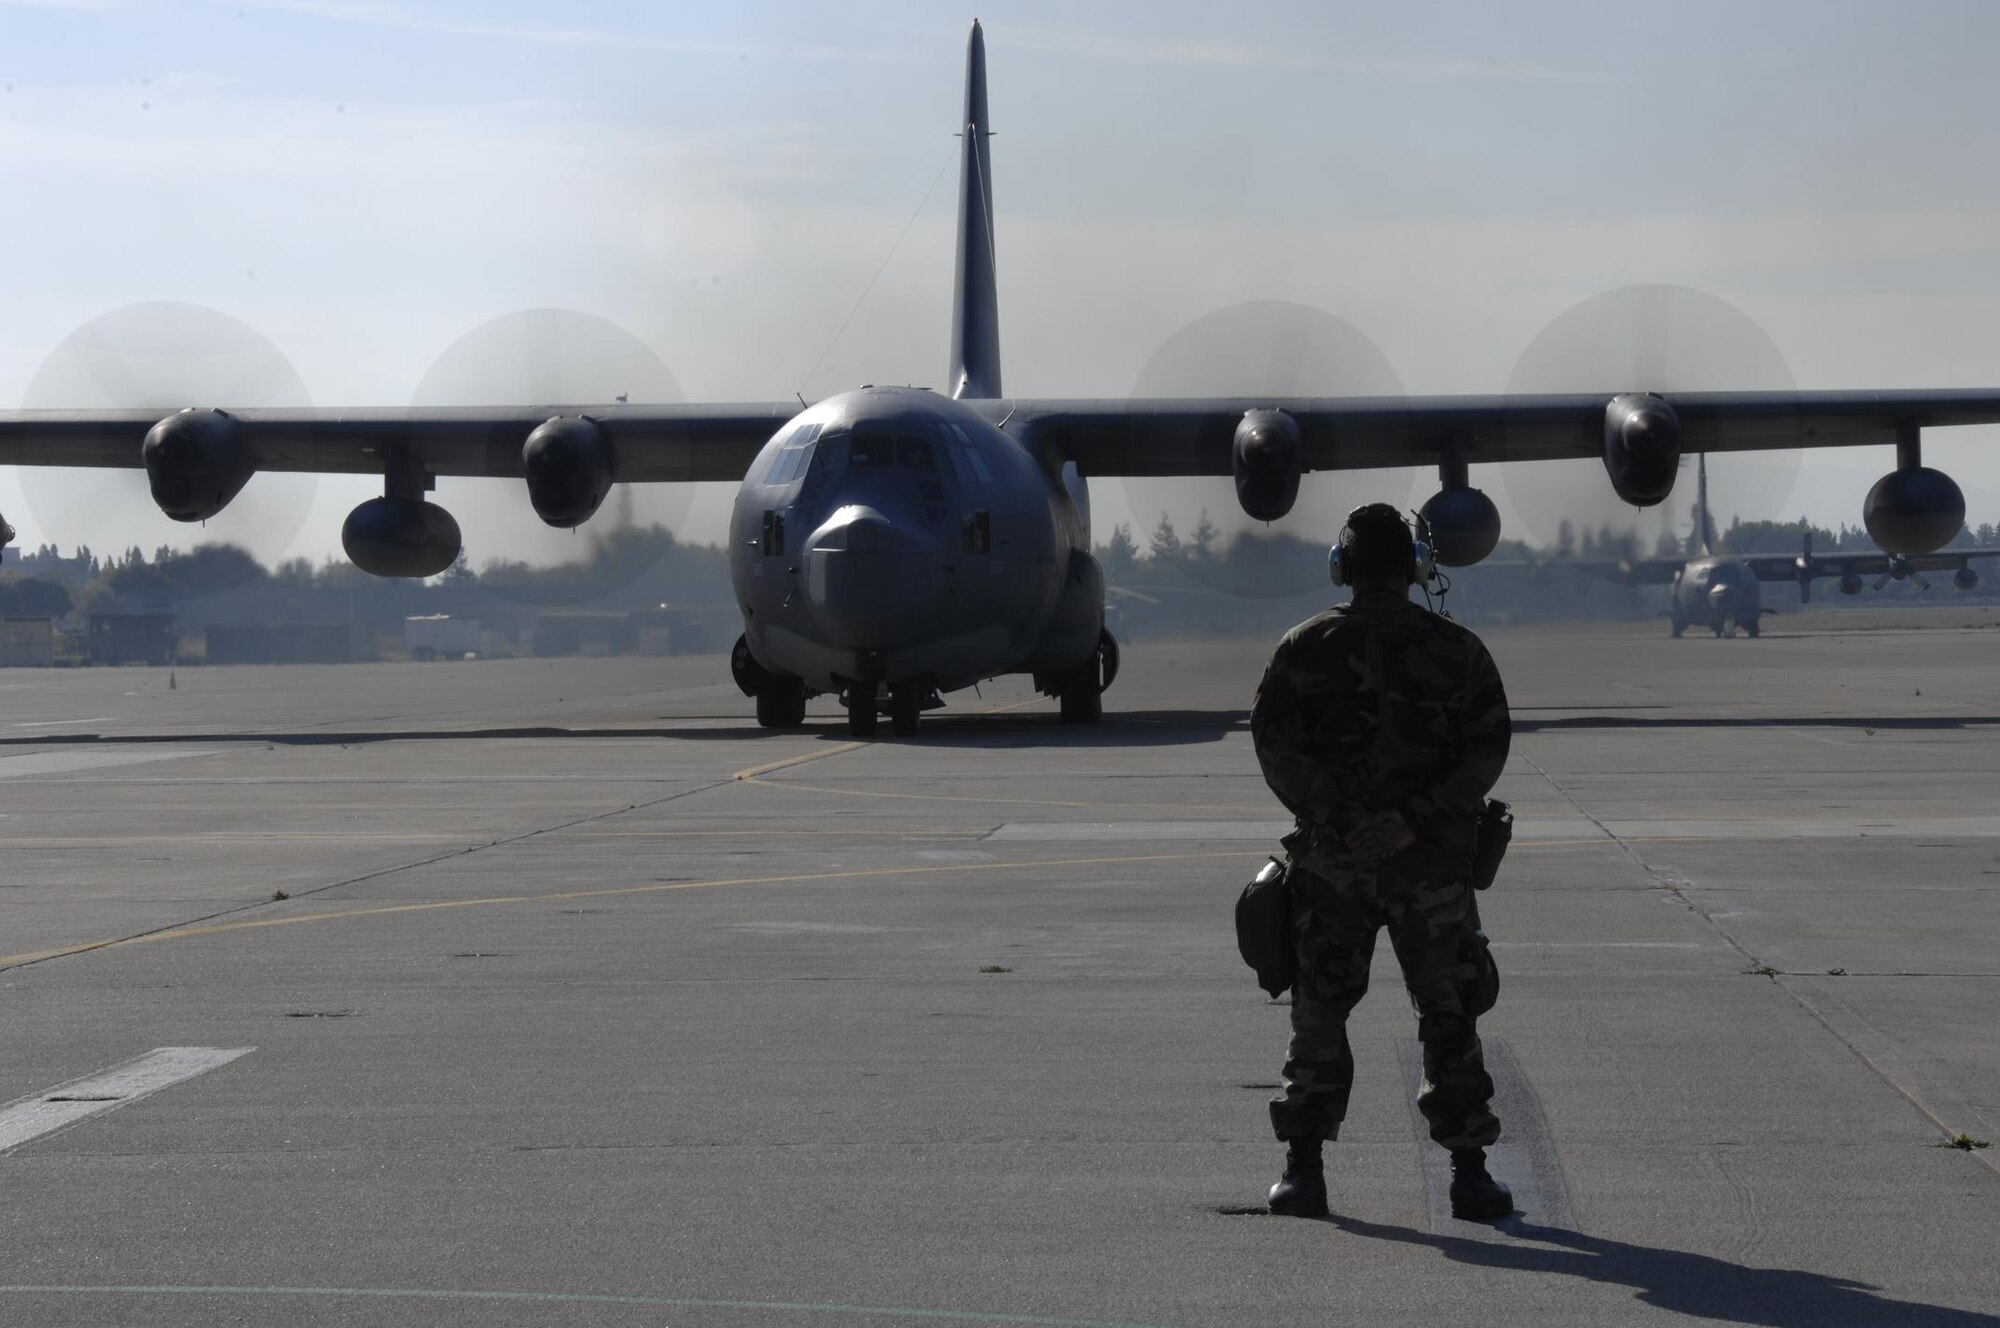 Two MC-130P Combat Shadow tanker aircraft from the 129th Rescue Wing, Moffett Federal Airfield, Calif., taxi on the Moffett flightline. (U.S. Air Force photo by Master Sgt. Daniel Kacir) 